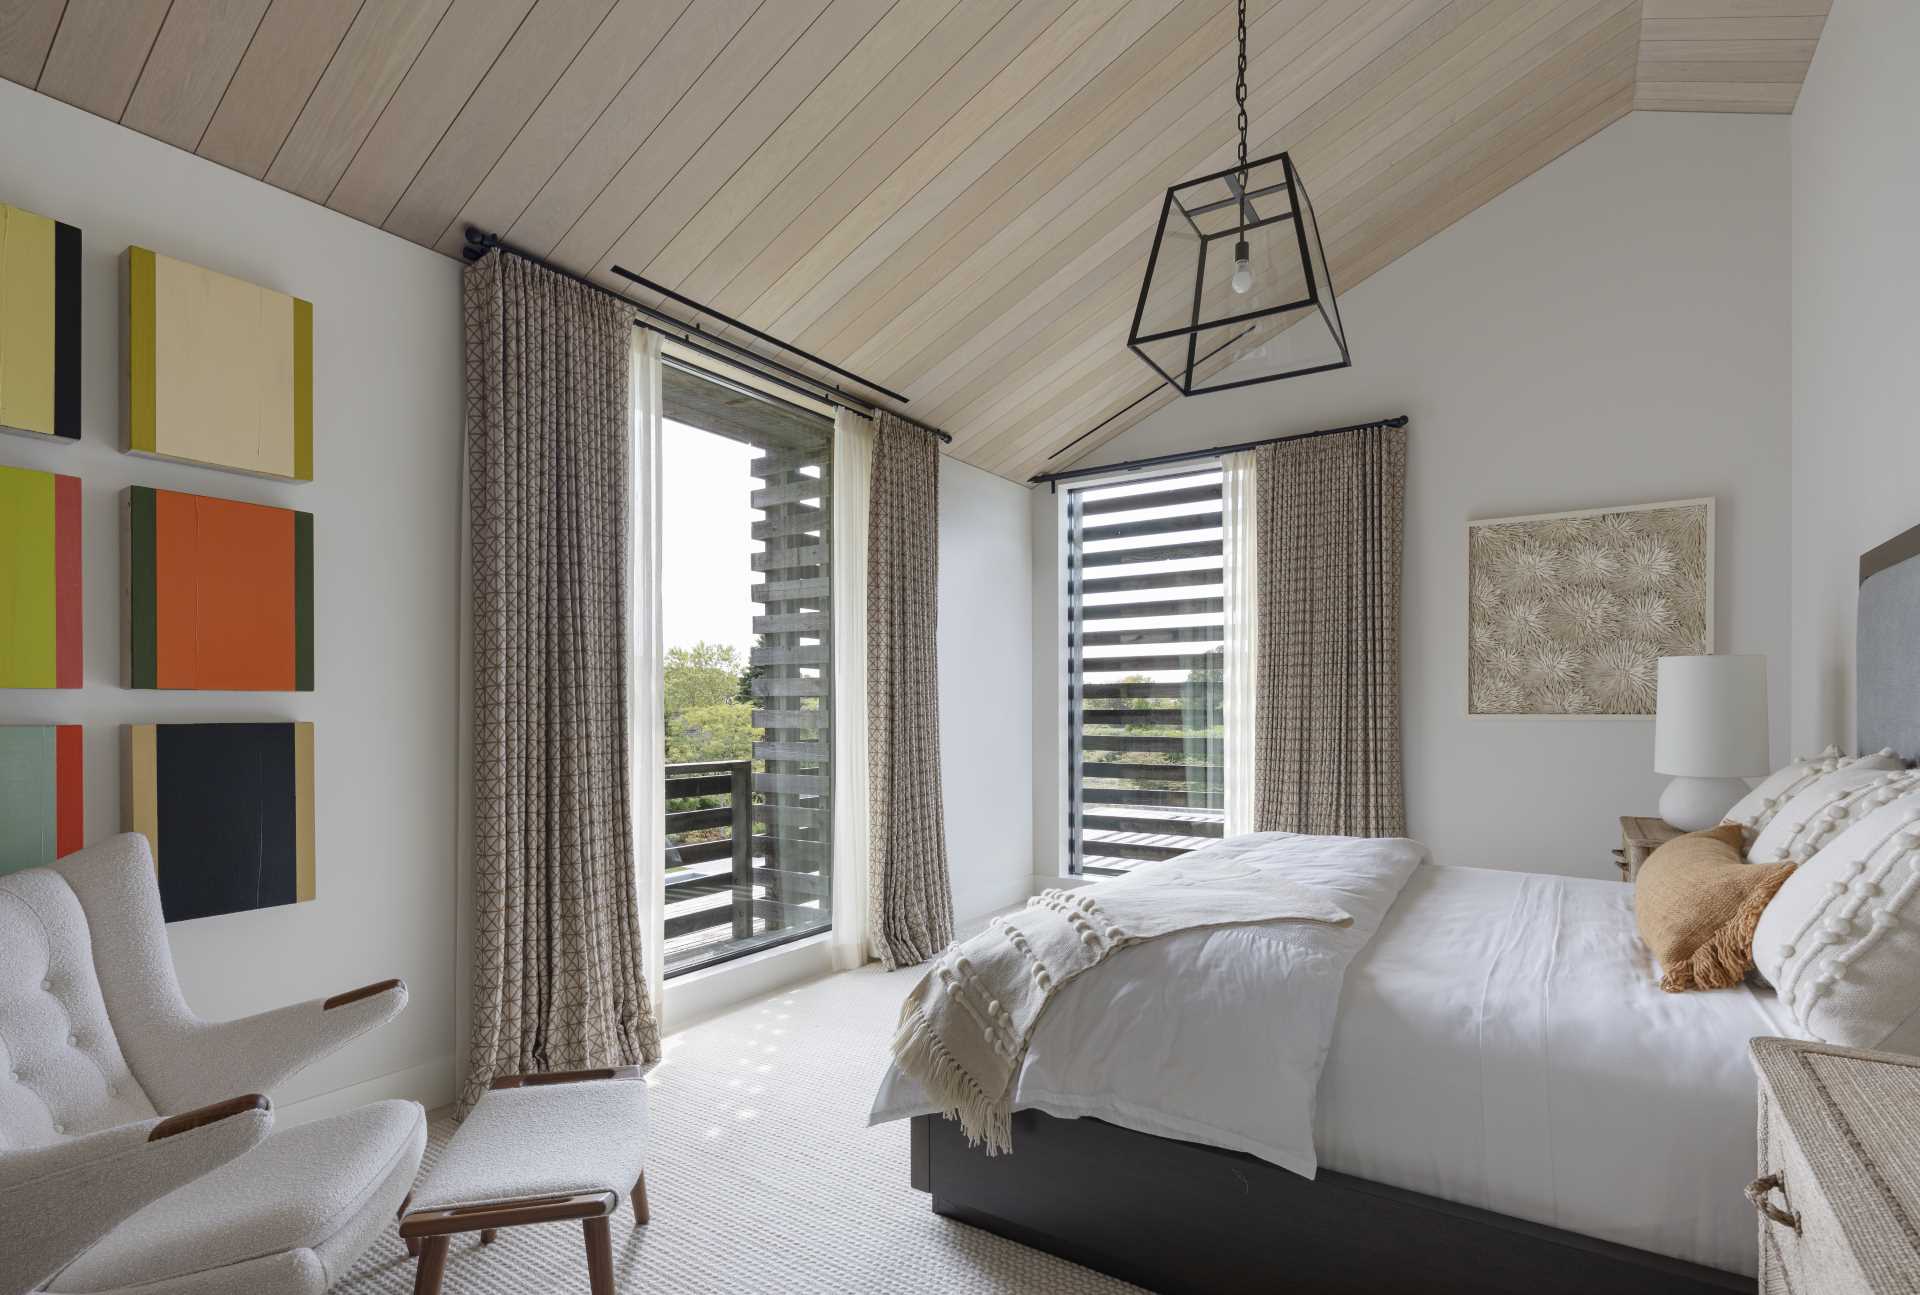 The primary bedroom has a wood ceiling and windows that provide views of the trees.